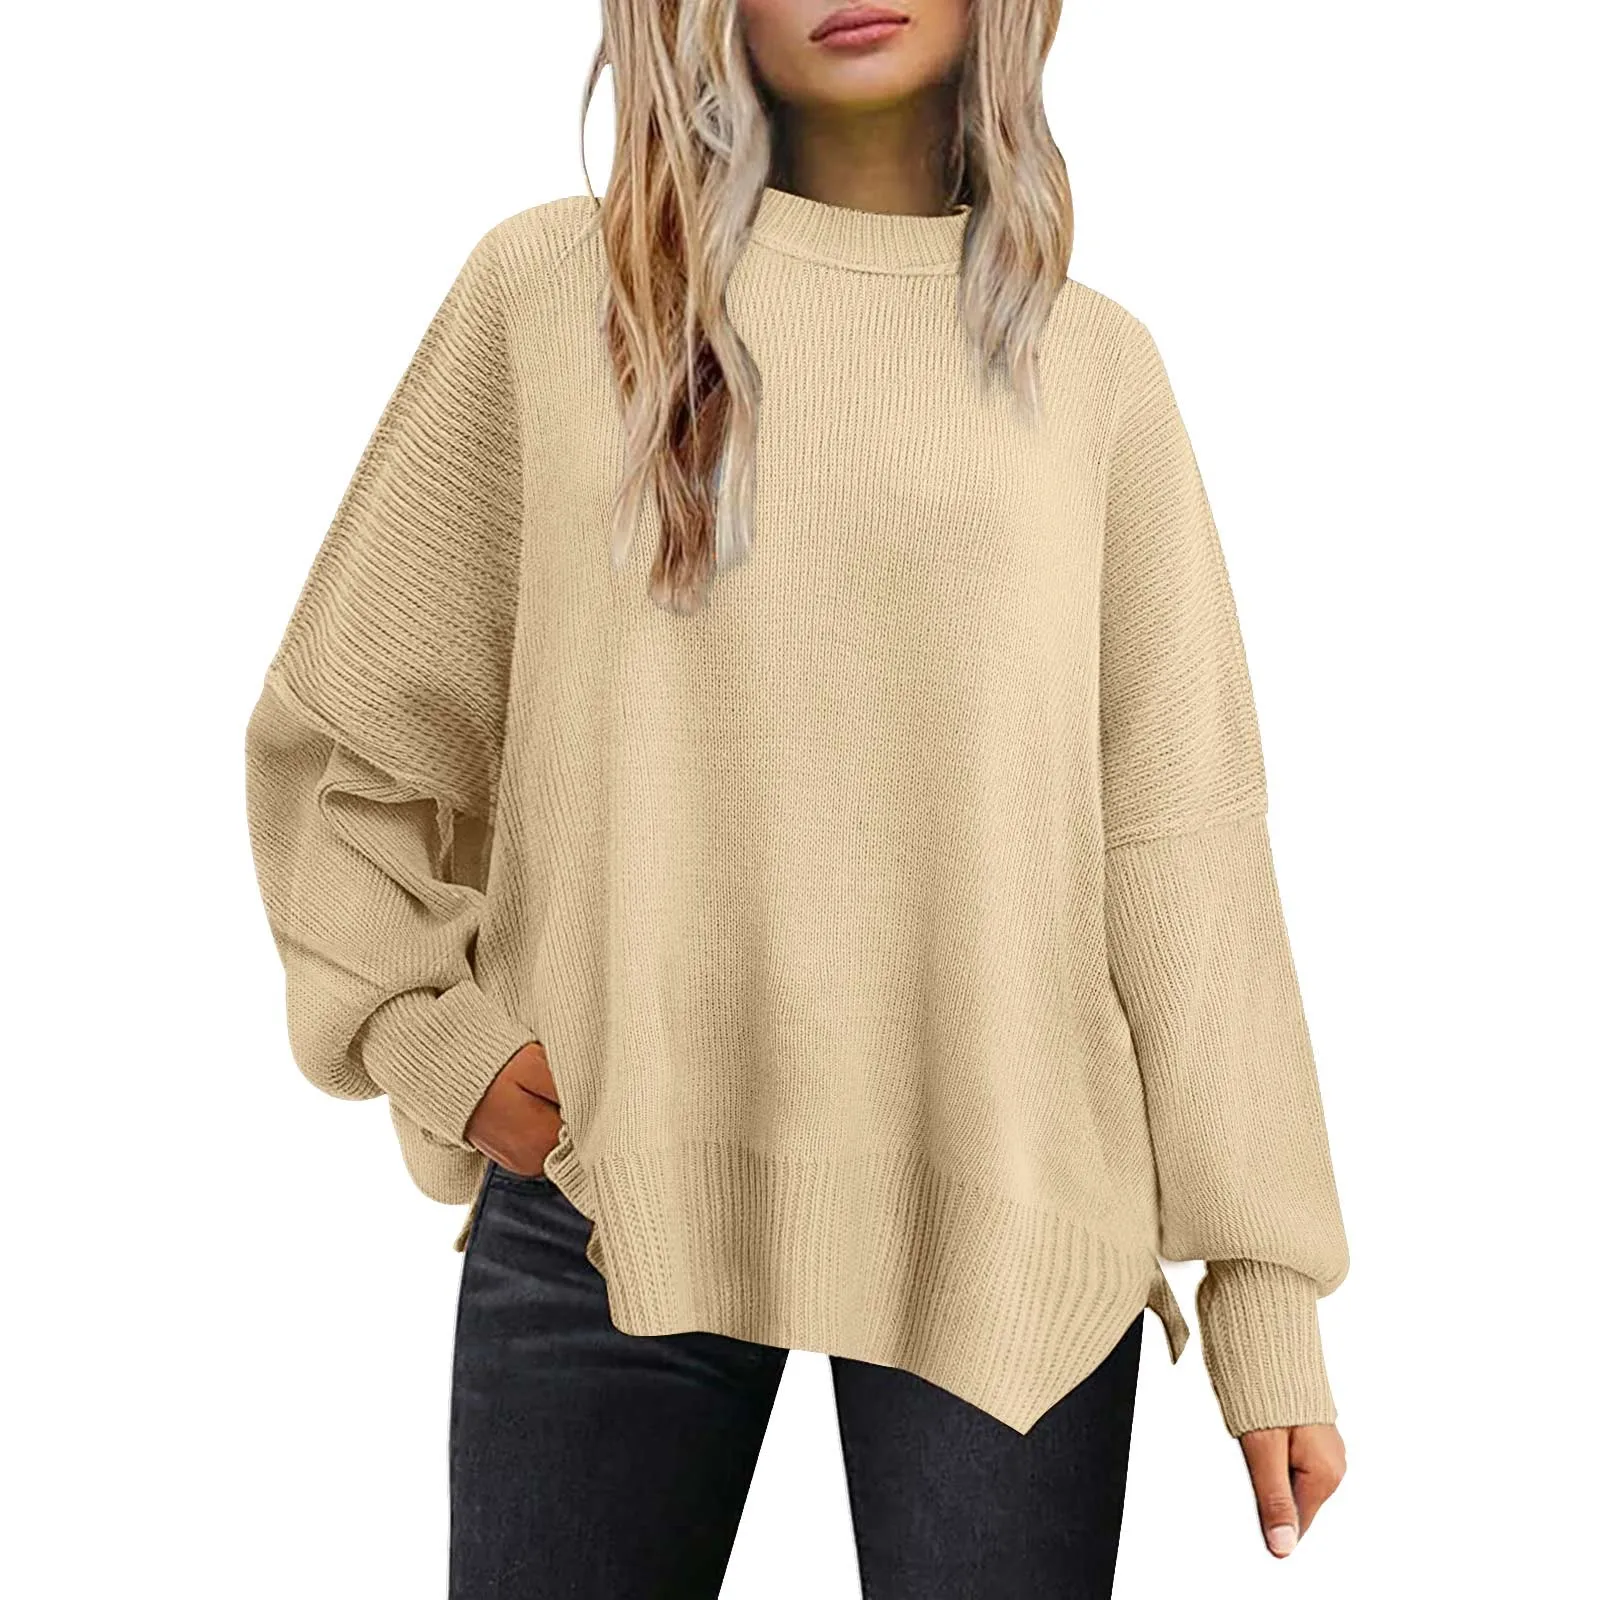 

European American Round Neck Bat Wing Long Sleeved Sweater For Women Autumn Winter New Knitted Side Slit Pullover Fashion Tops